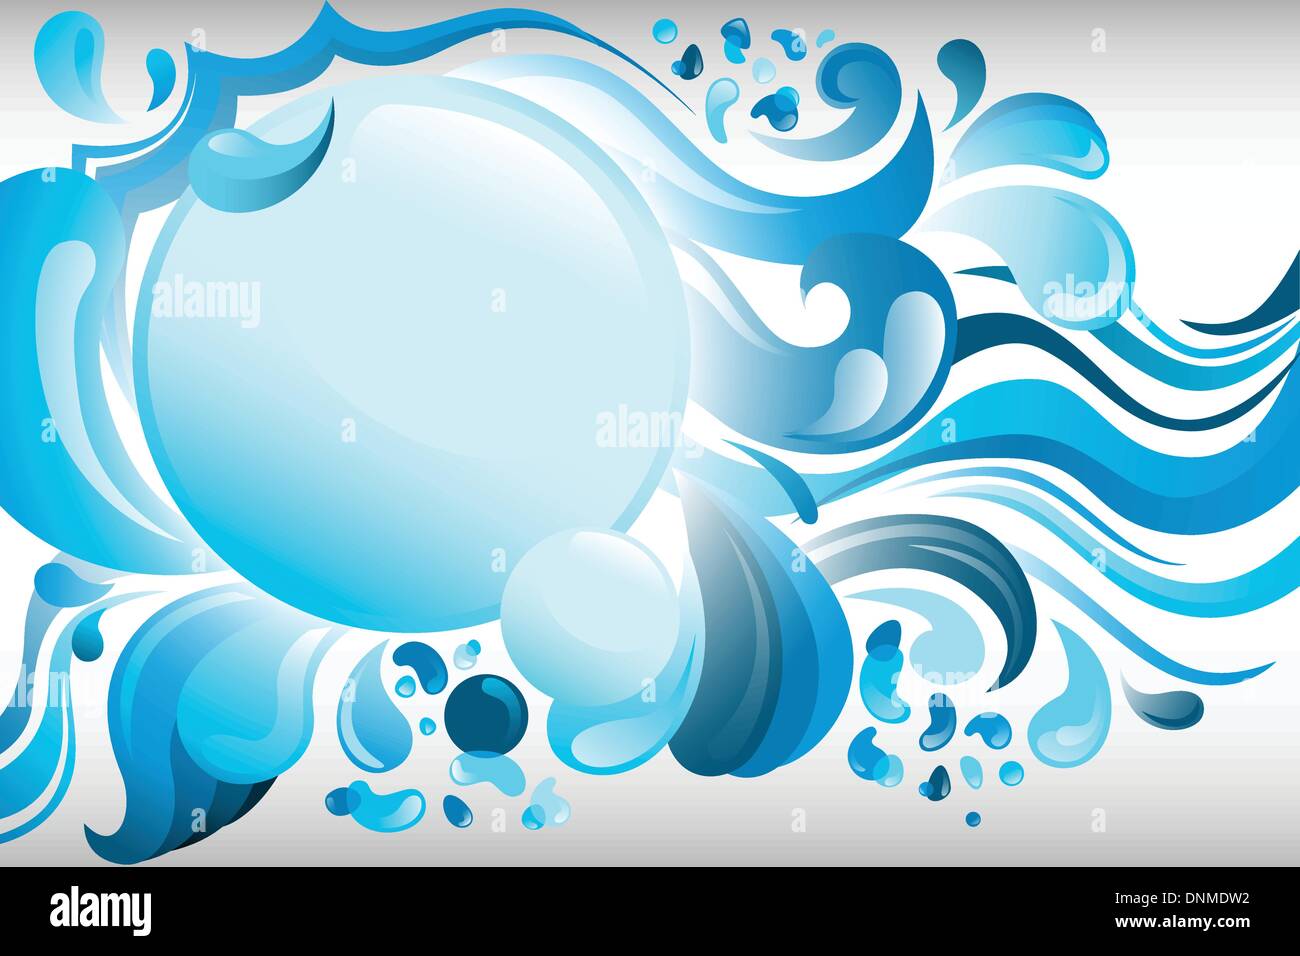 A vector illustration of abstract waves background Stock Vector